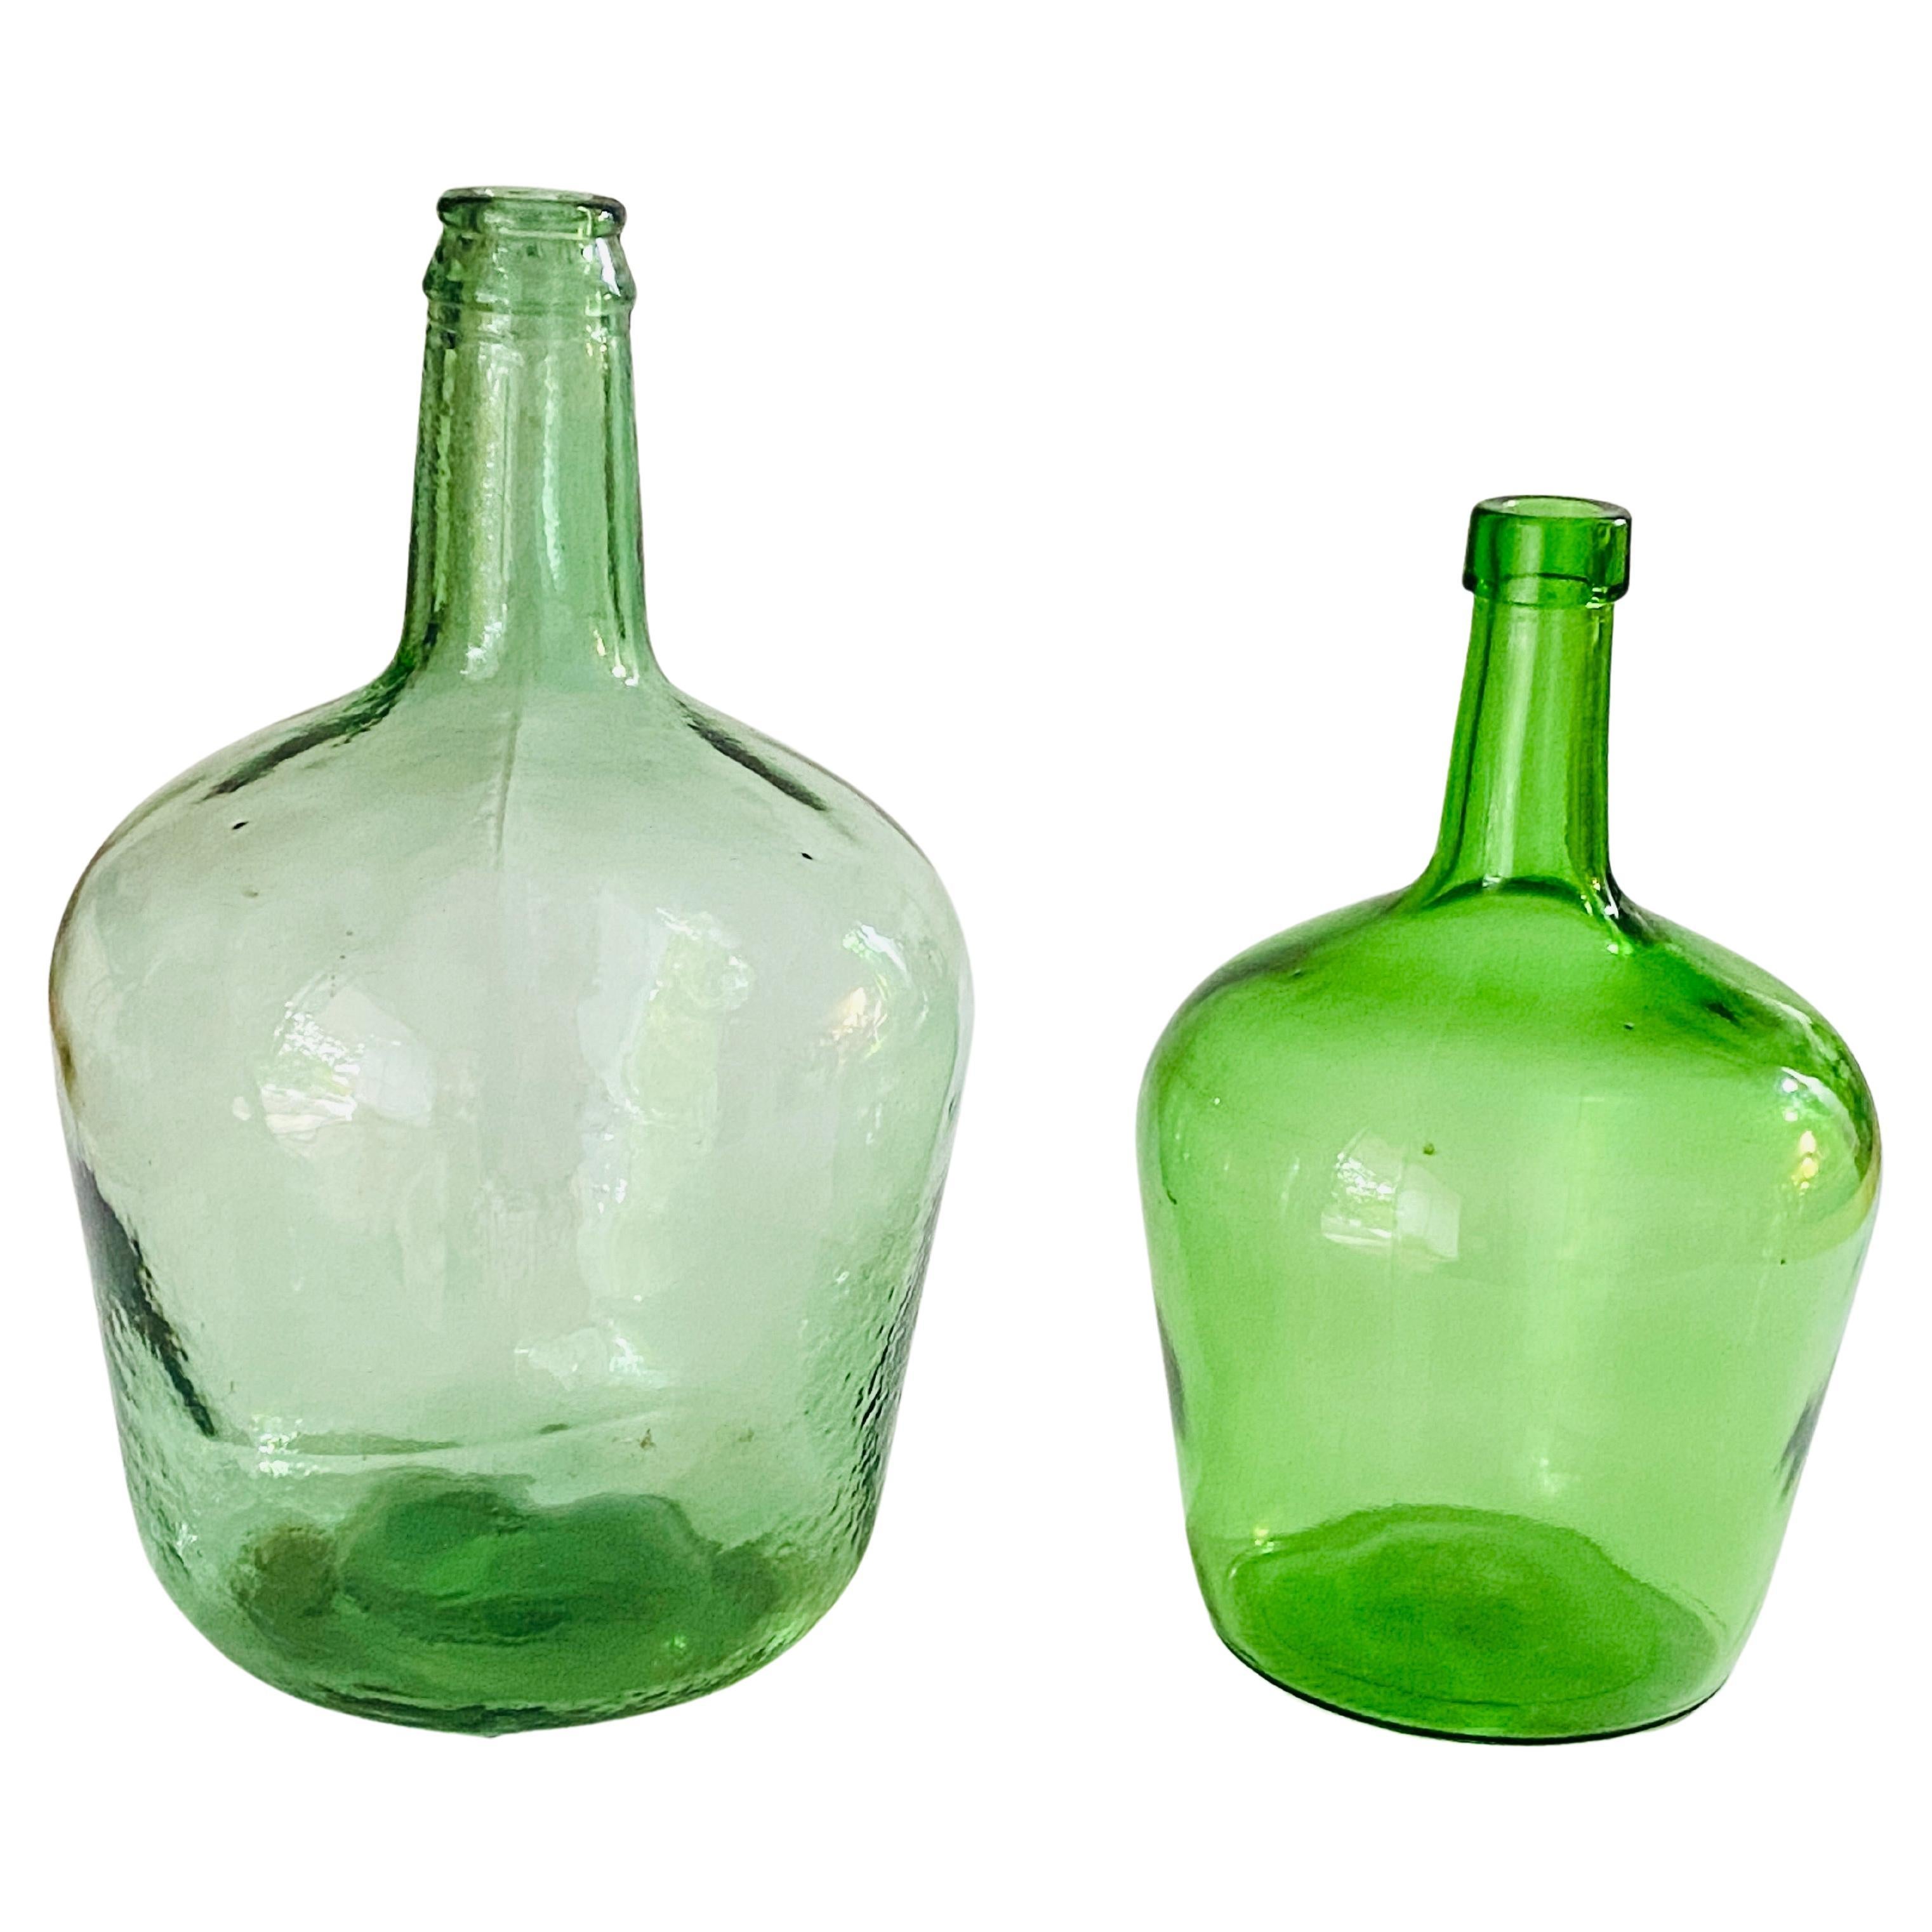 Antique French Set of Two Glass Bottles Green Color from France, circa 1950